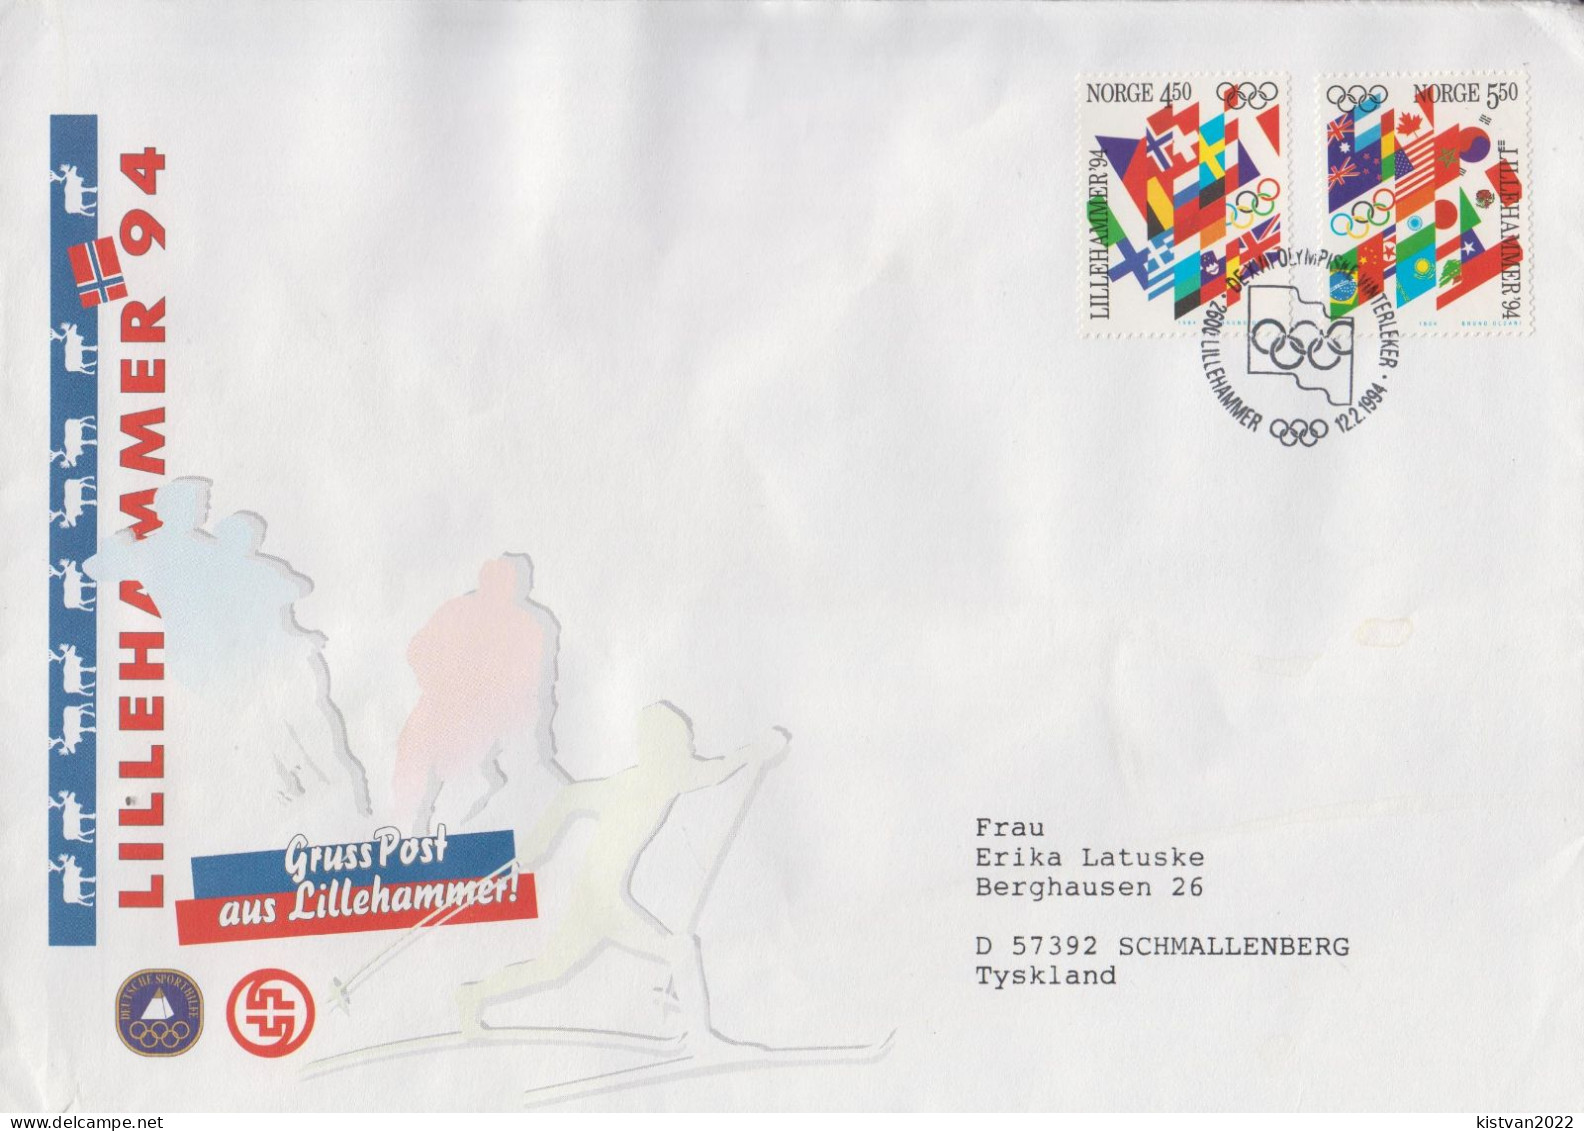 Postal History: Norway Cover With Lillehammer Cancel - Hiver 1994: Lillehammer